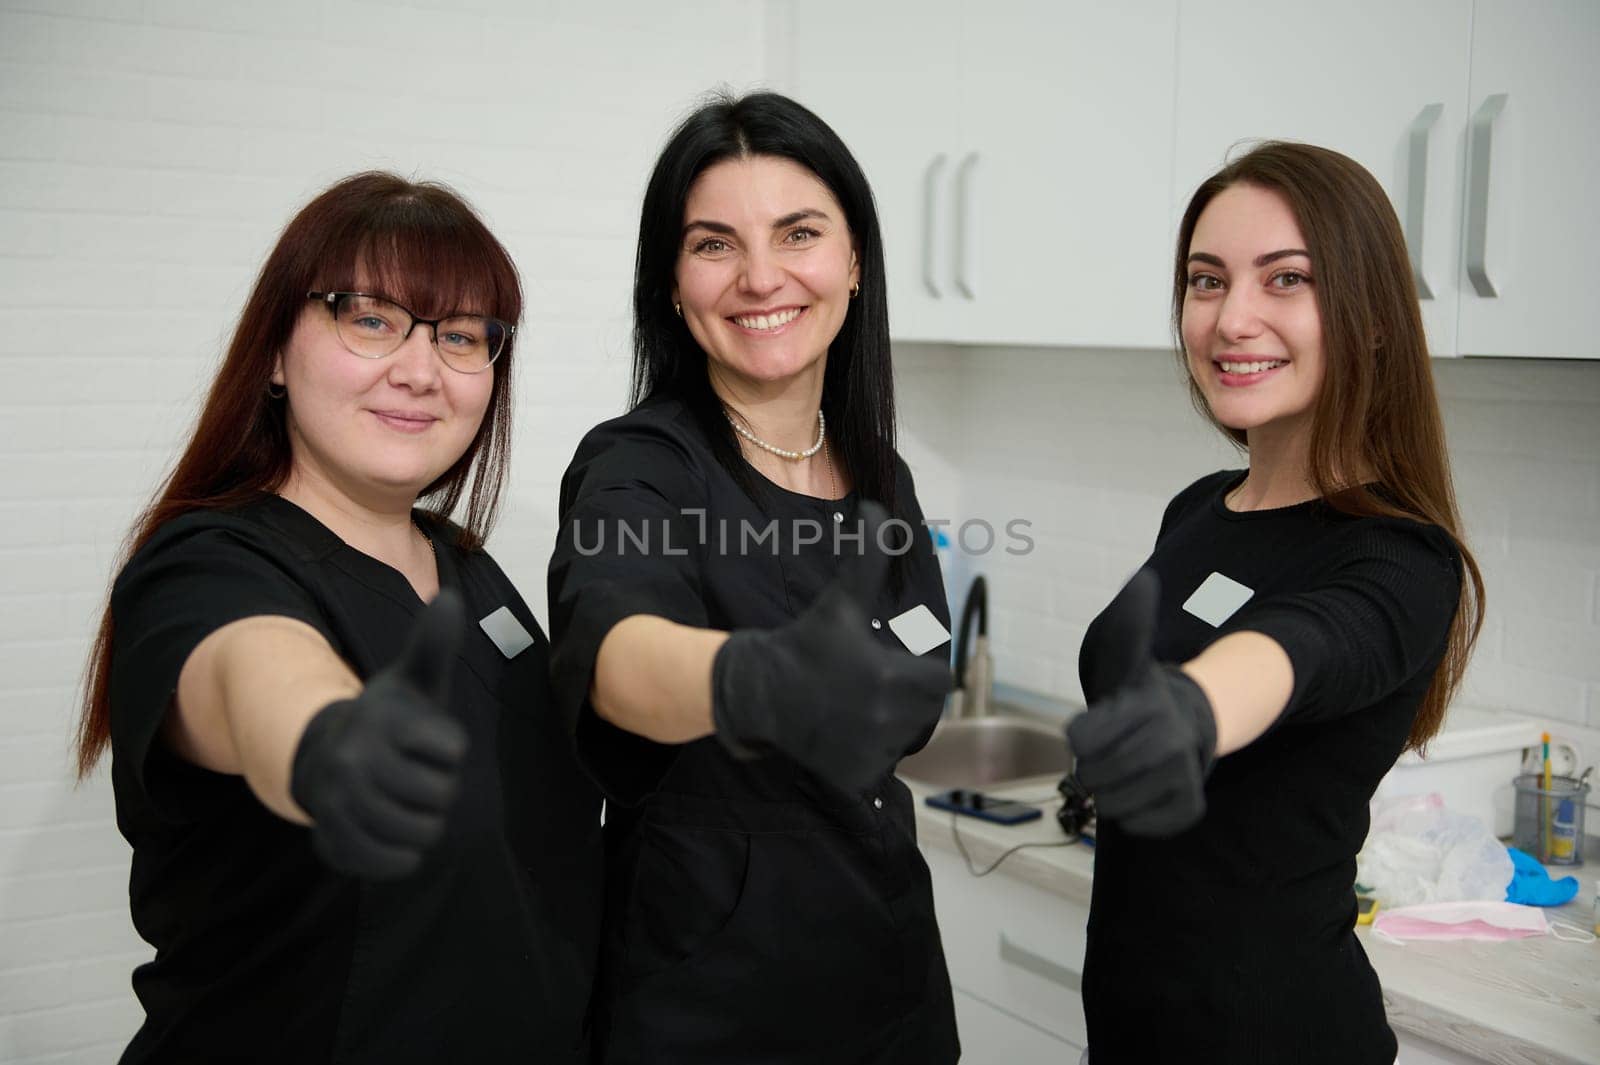 Confident team of female dentists doctors orthodontists in black medical uniform, smiling broadly looking at camera, gesturing with thumbs up, showing approval hands sign, in a dental office interior